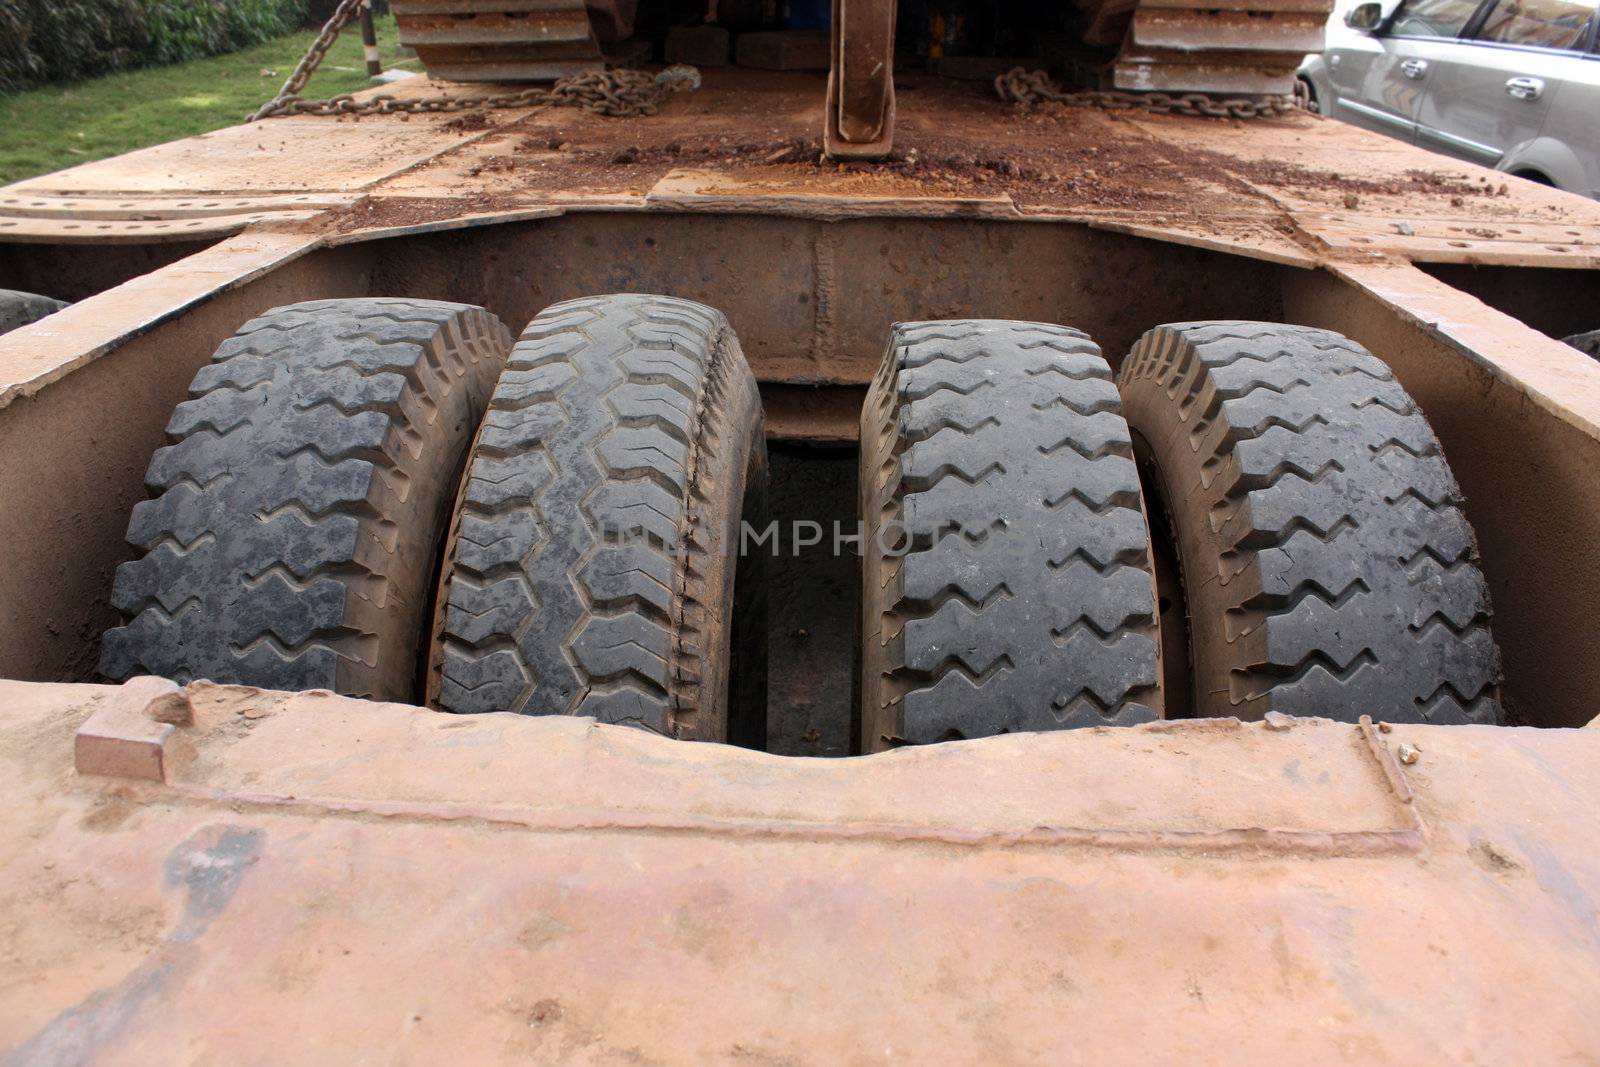 Trailer Tires by thefinalmiracle